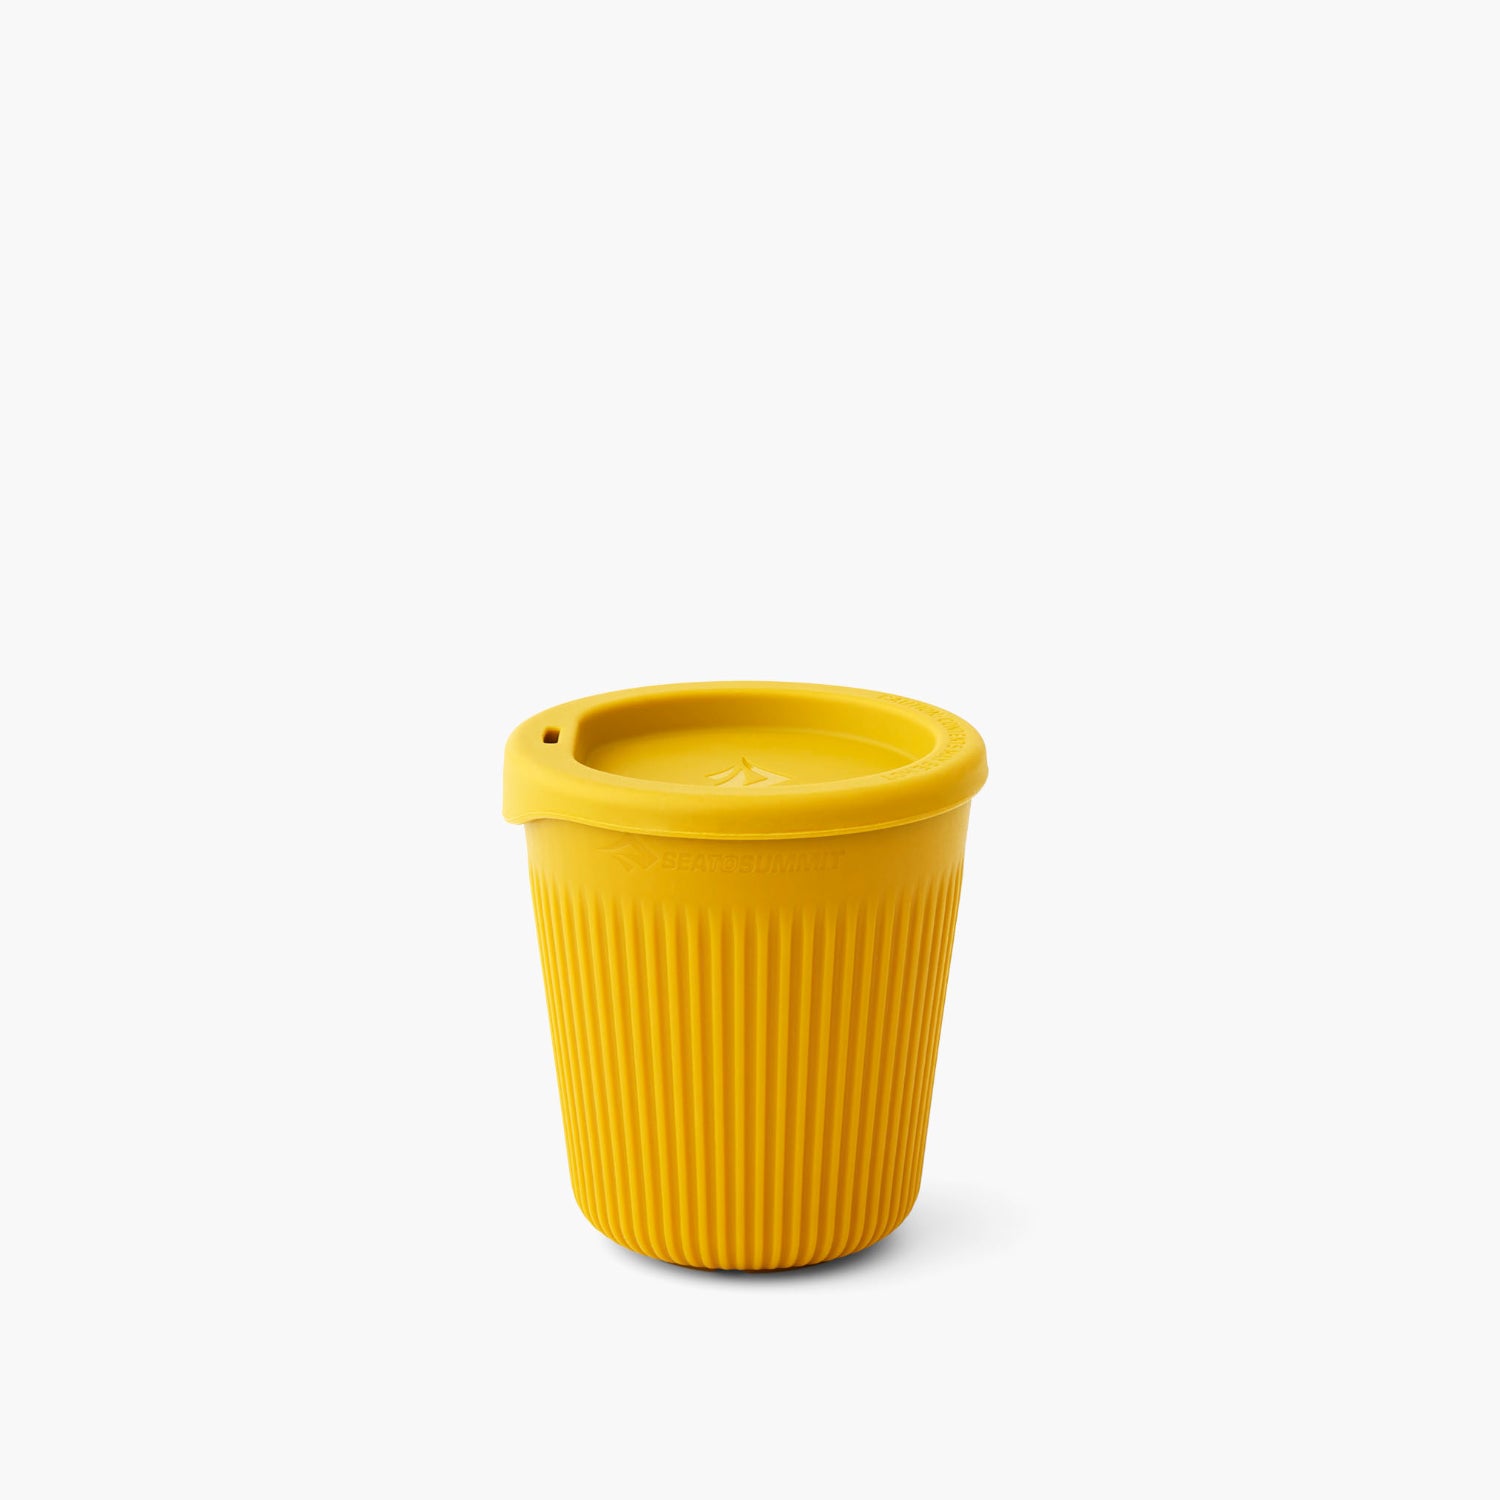 Sea to Summit Passage Cup in arrowwood yellow colour